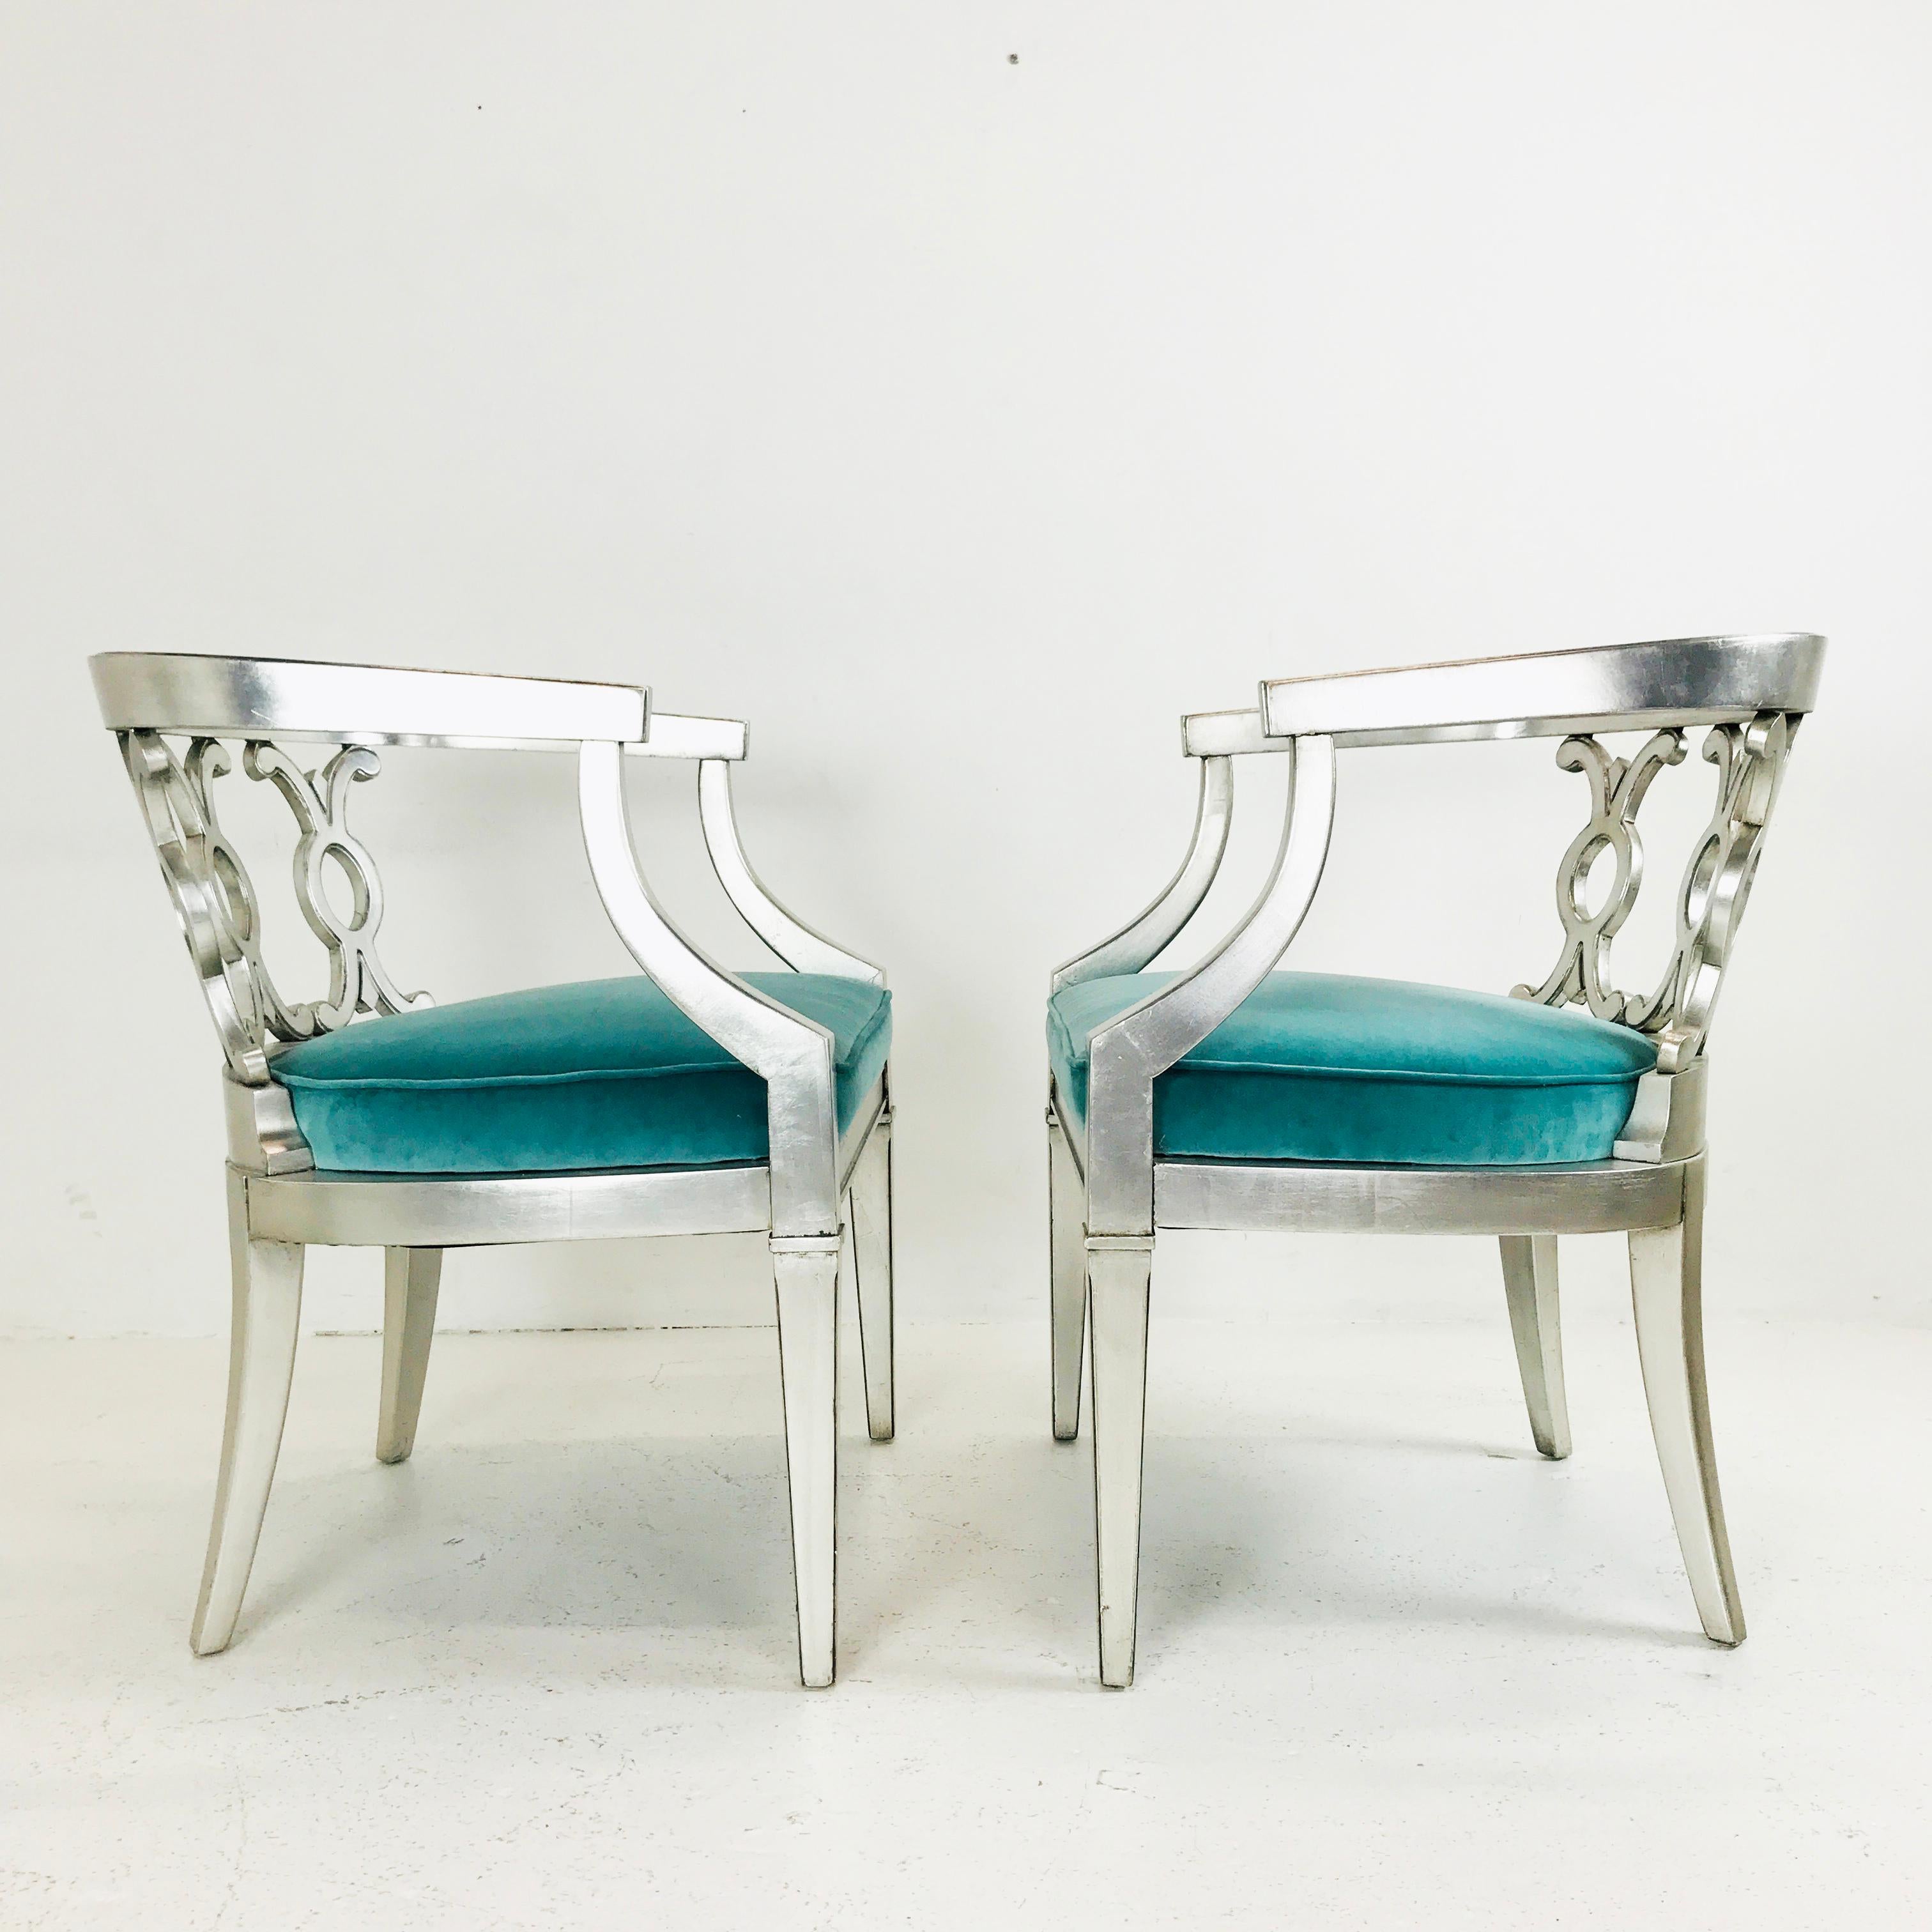 20th Century Hollywood Regency Sliver Leaf Barrel Back Armchairs with Turquoise Velvet, Pair